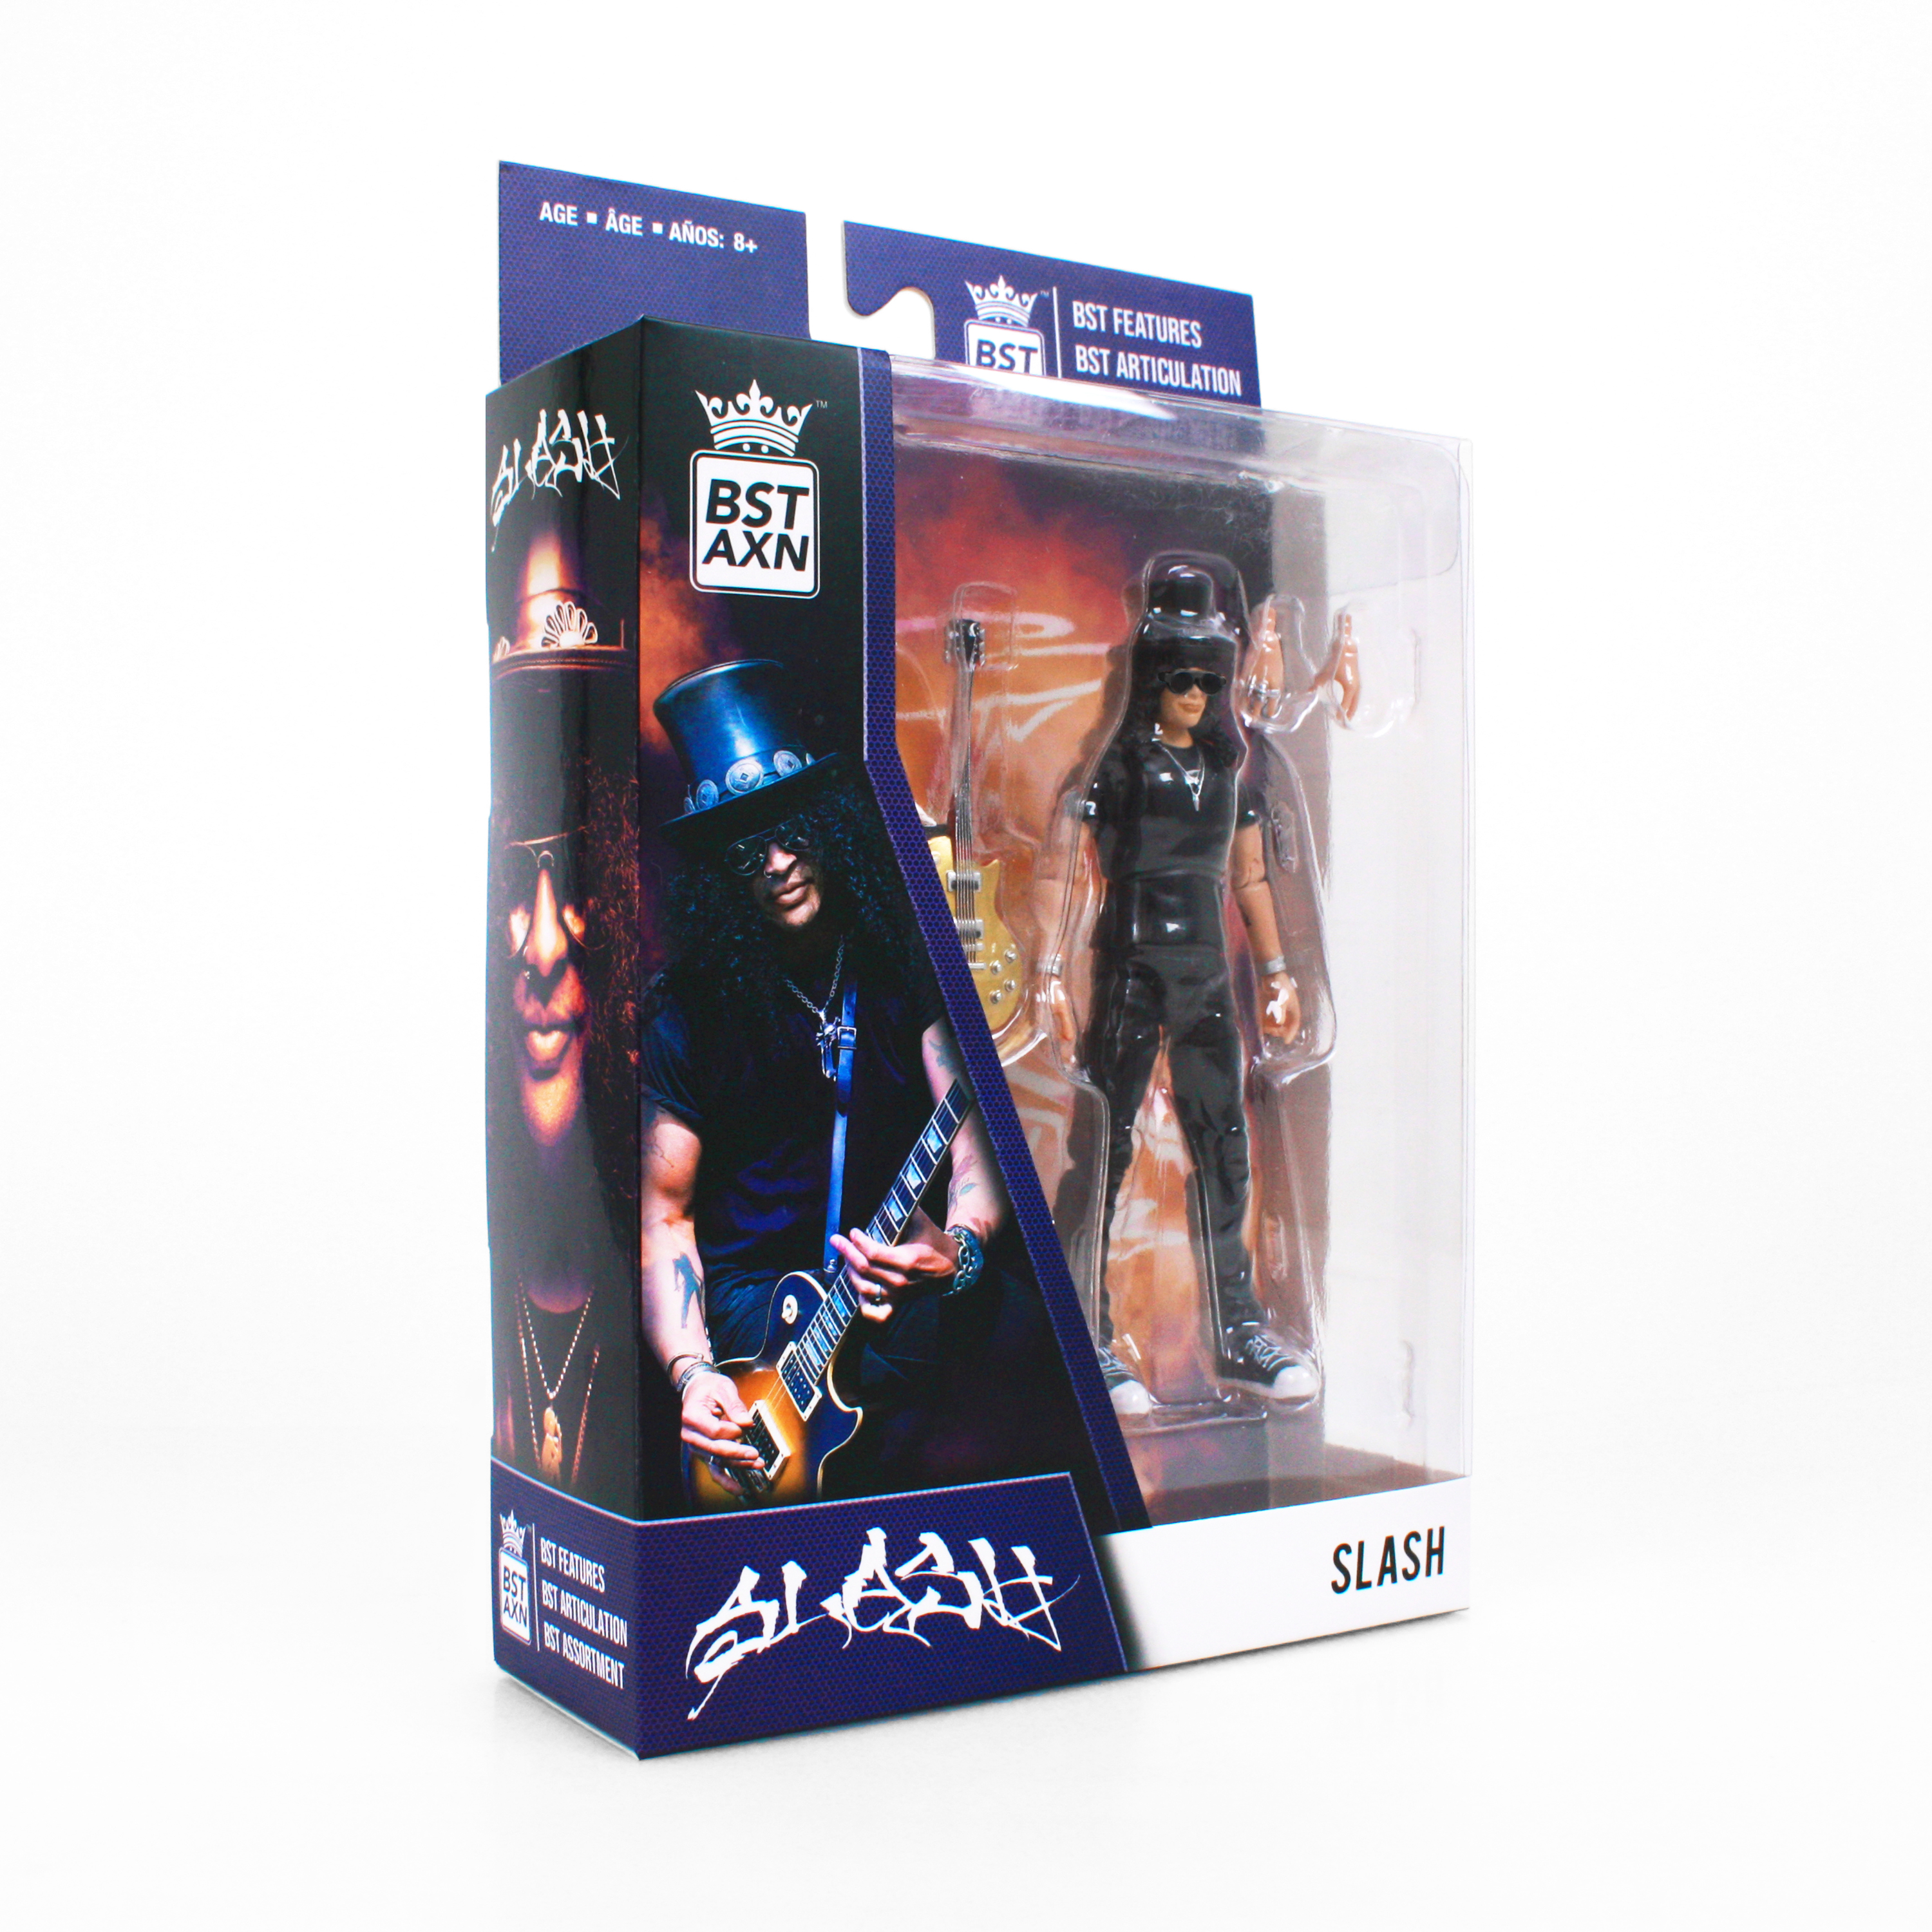 Guns N Roses Slash - The Loyal Subjects BST AXN 5" Action Figure - image 3 of 5